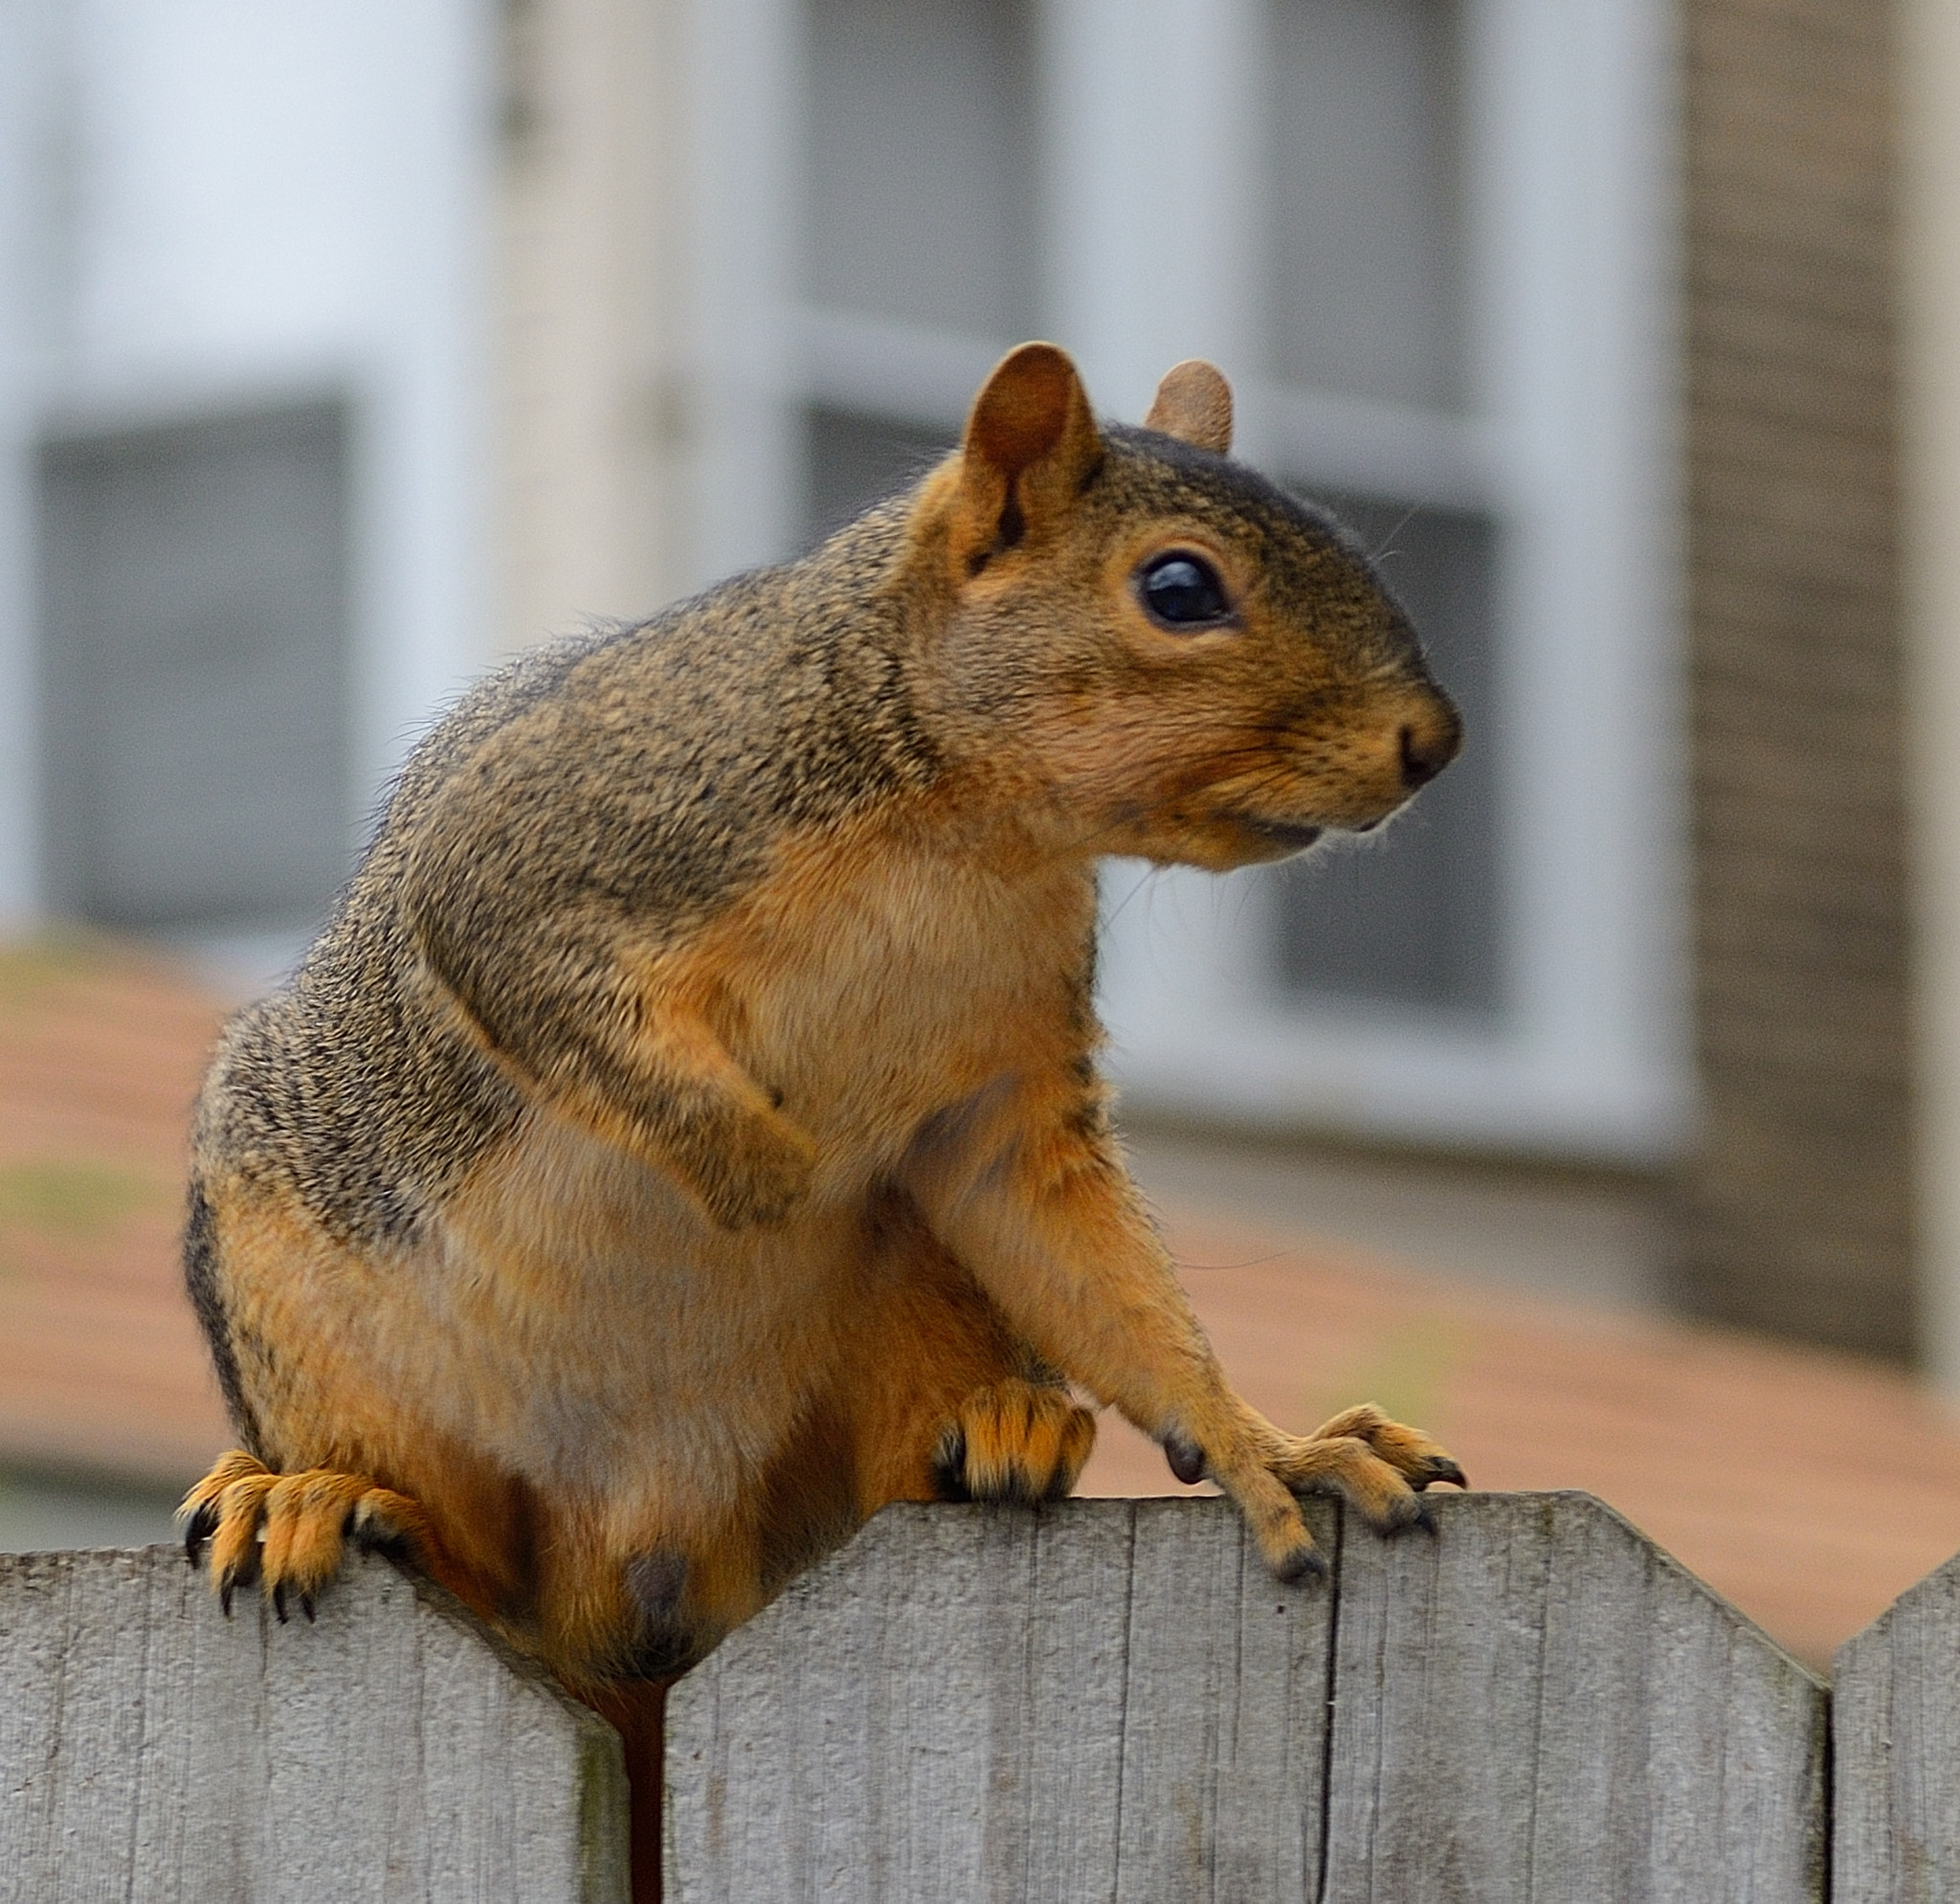 Nikon D7000 sample photo. Squirrels like to pose photography